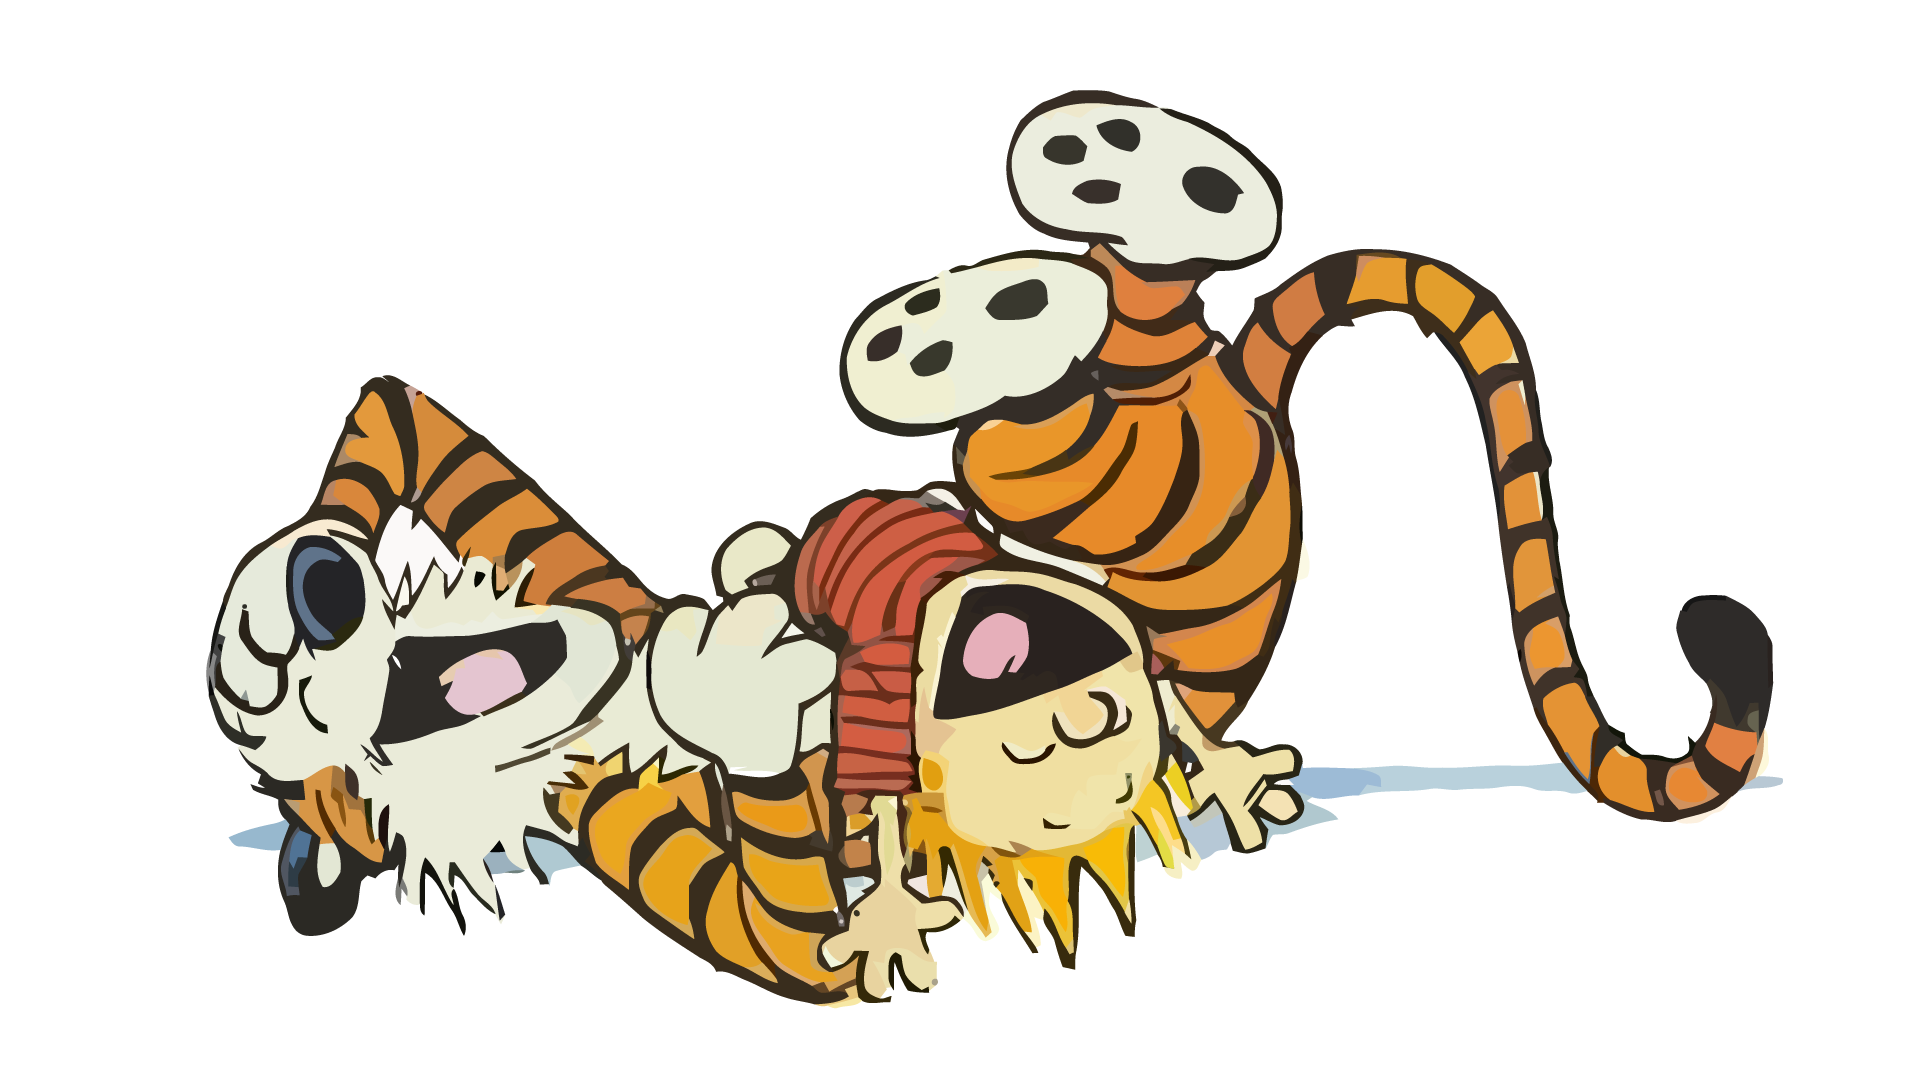 calvin-and-hobbes-rolling-on-the-floor.png